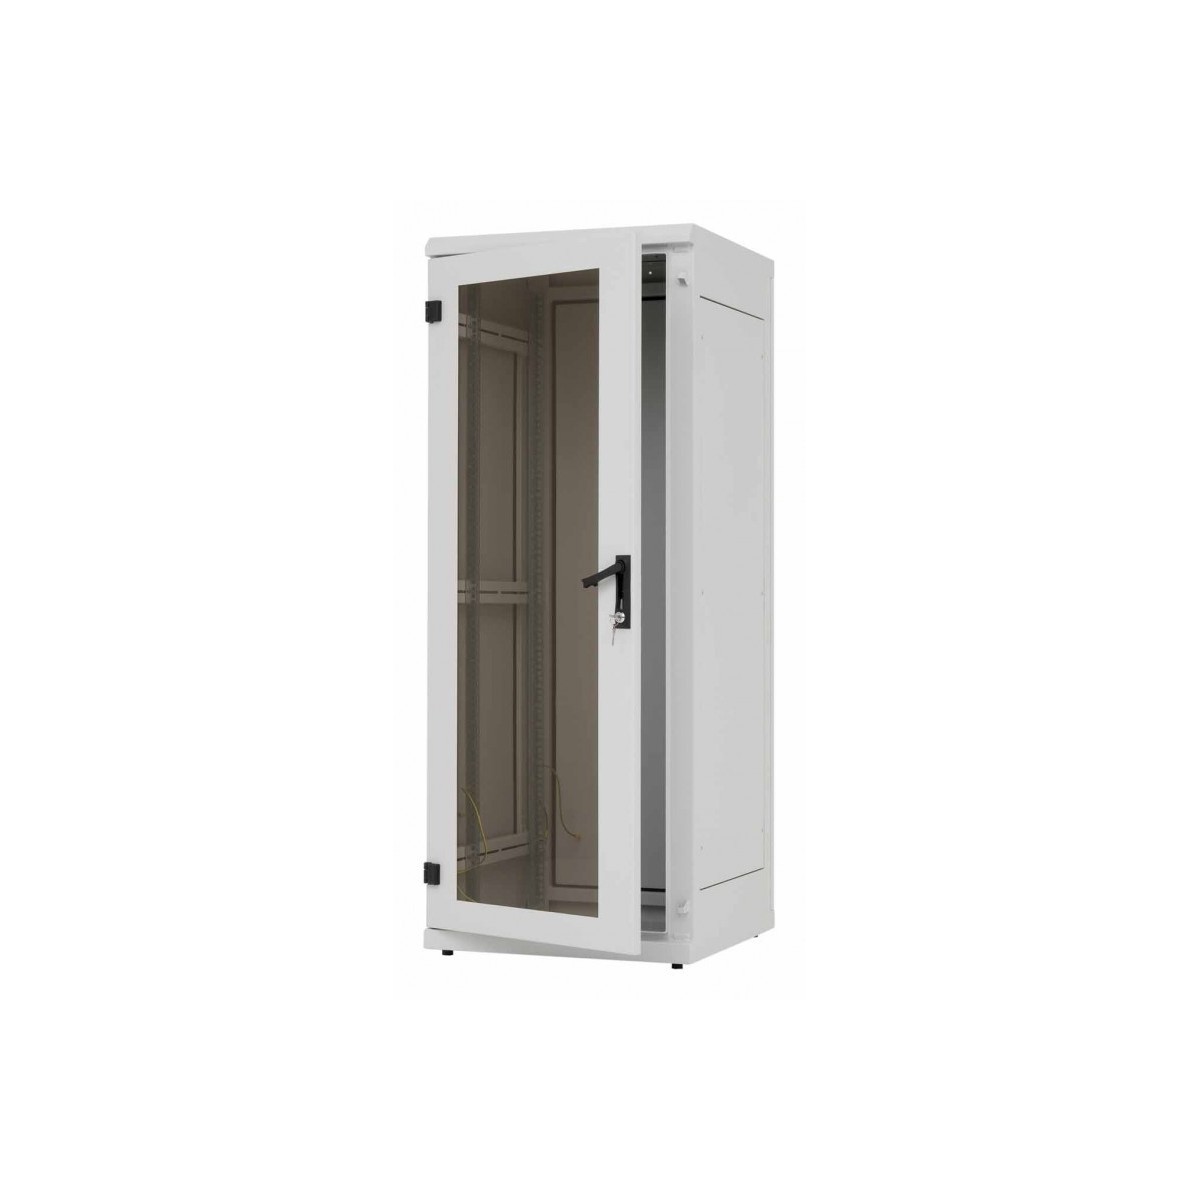 TRITON Free-standing cabinet RIE 800x1000 32U - Freestanding rack - 400 kg - Gray - Stainless steel - 48.3 cm (19") - 800 mm